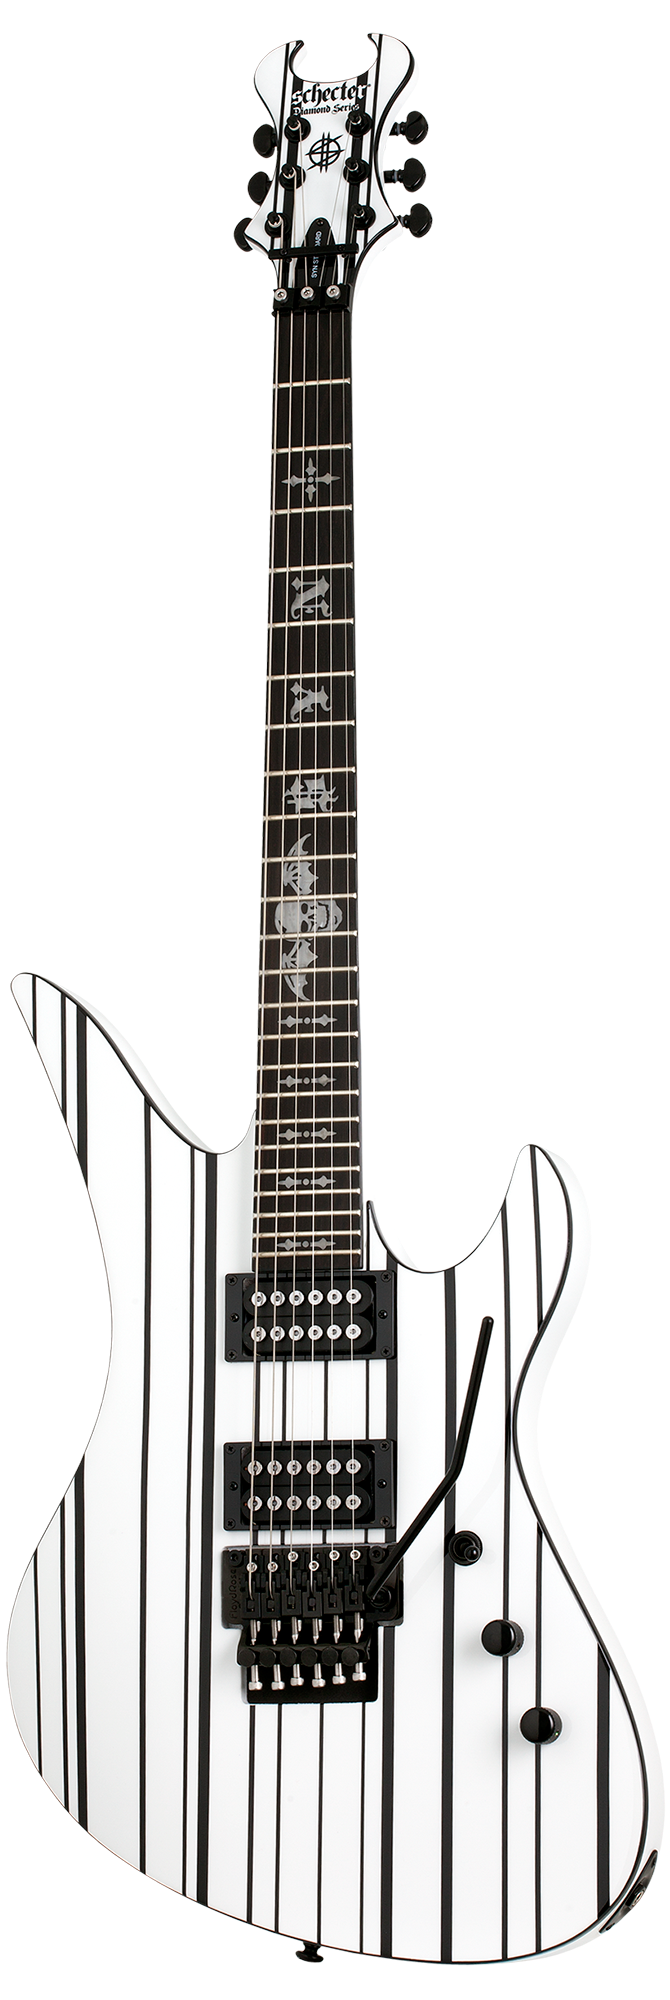 SCHECTER SYNYSTER GATES STANDARD - GLOSS WHITE WITH BLACK PINSTRIPES (1746) MADE IN INDONESIA, SCHECTER, ELECTRIC GUITAR, schecter-electric-guitar-synstd-gwbp, ZOSO MUSIC SDN BHD